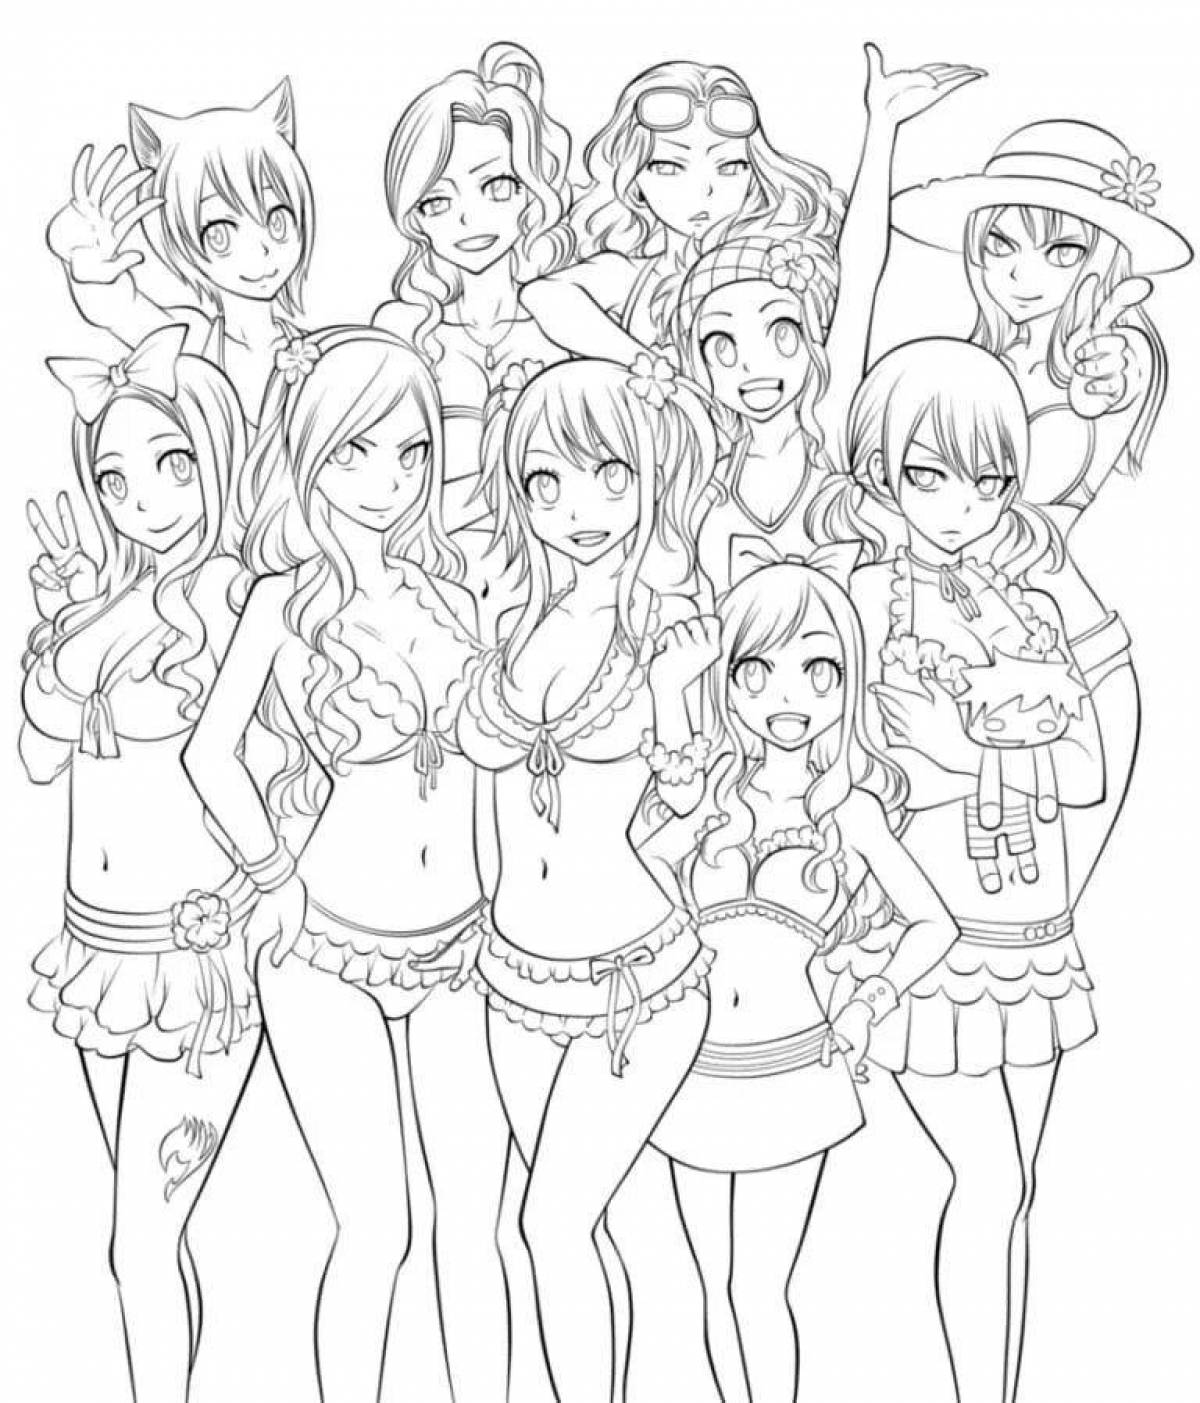 Funny anime people coloring page